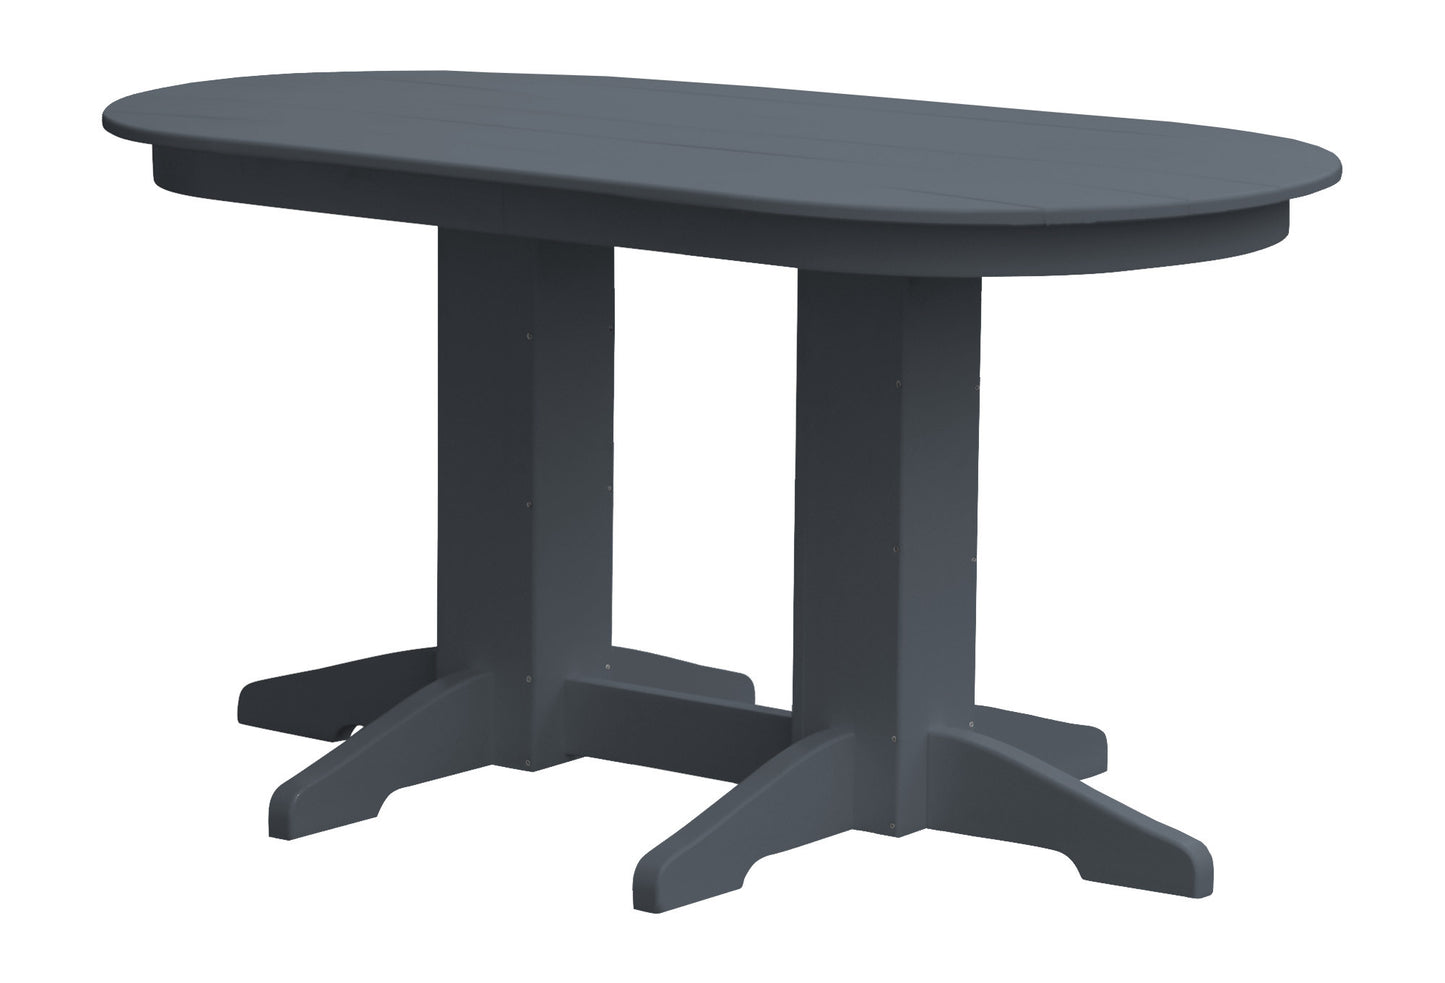 A&L Furniture Company Recycled Plastic 5' Oval Dining Table - Dark Gray